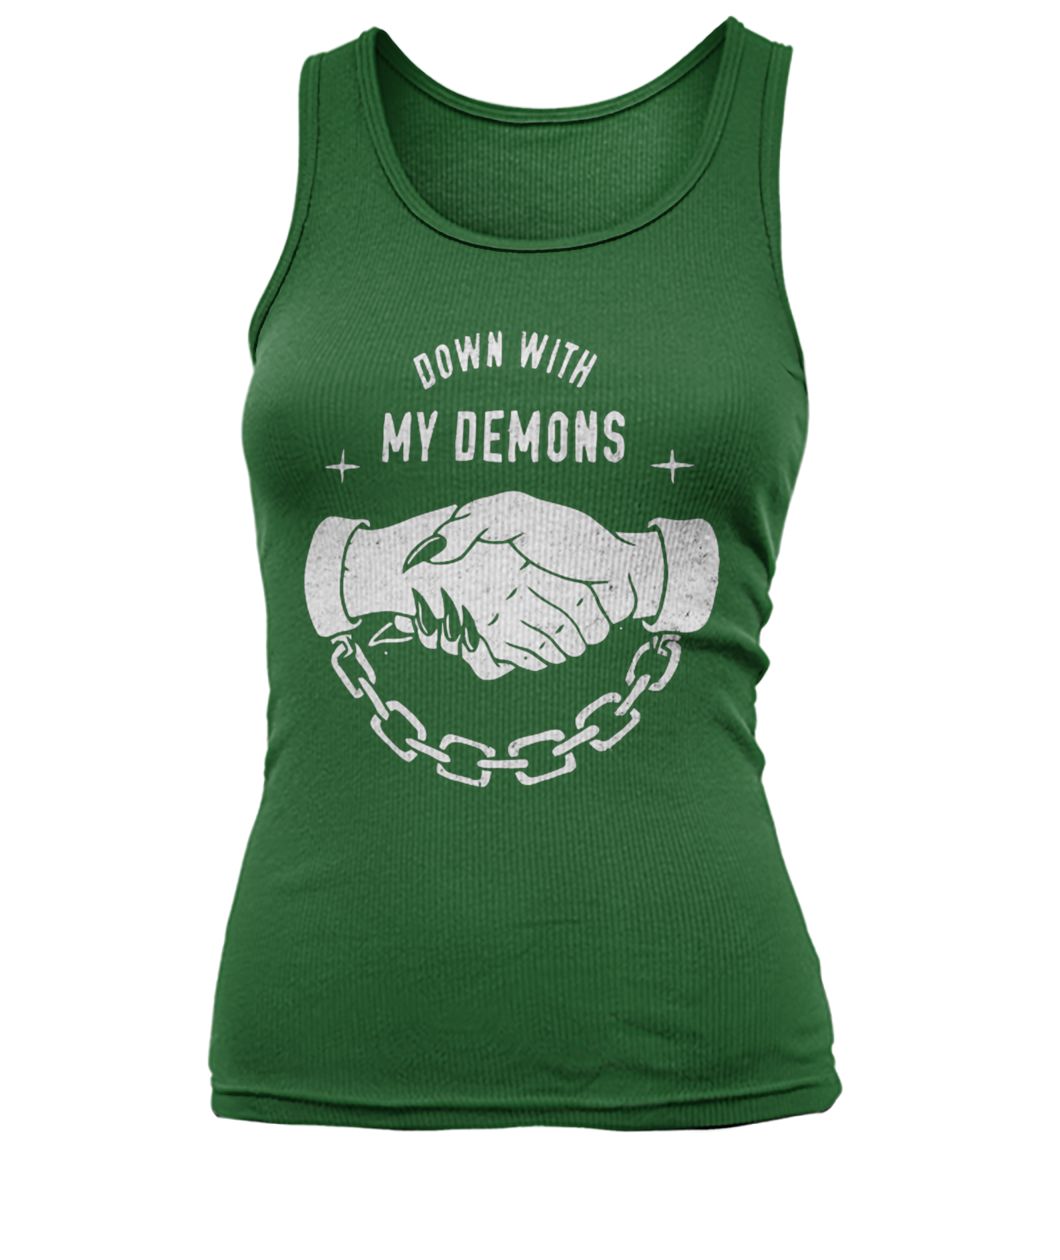 Down with my demons women's tank top